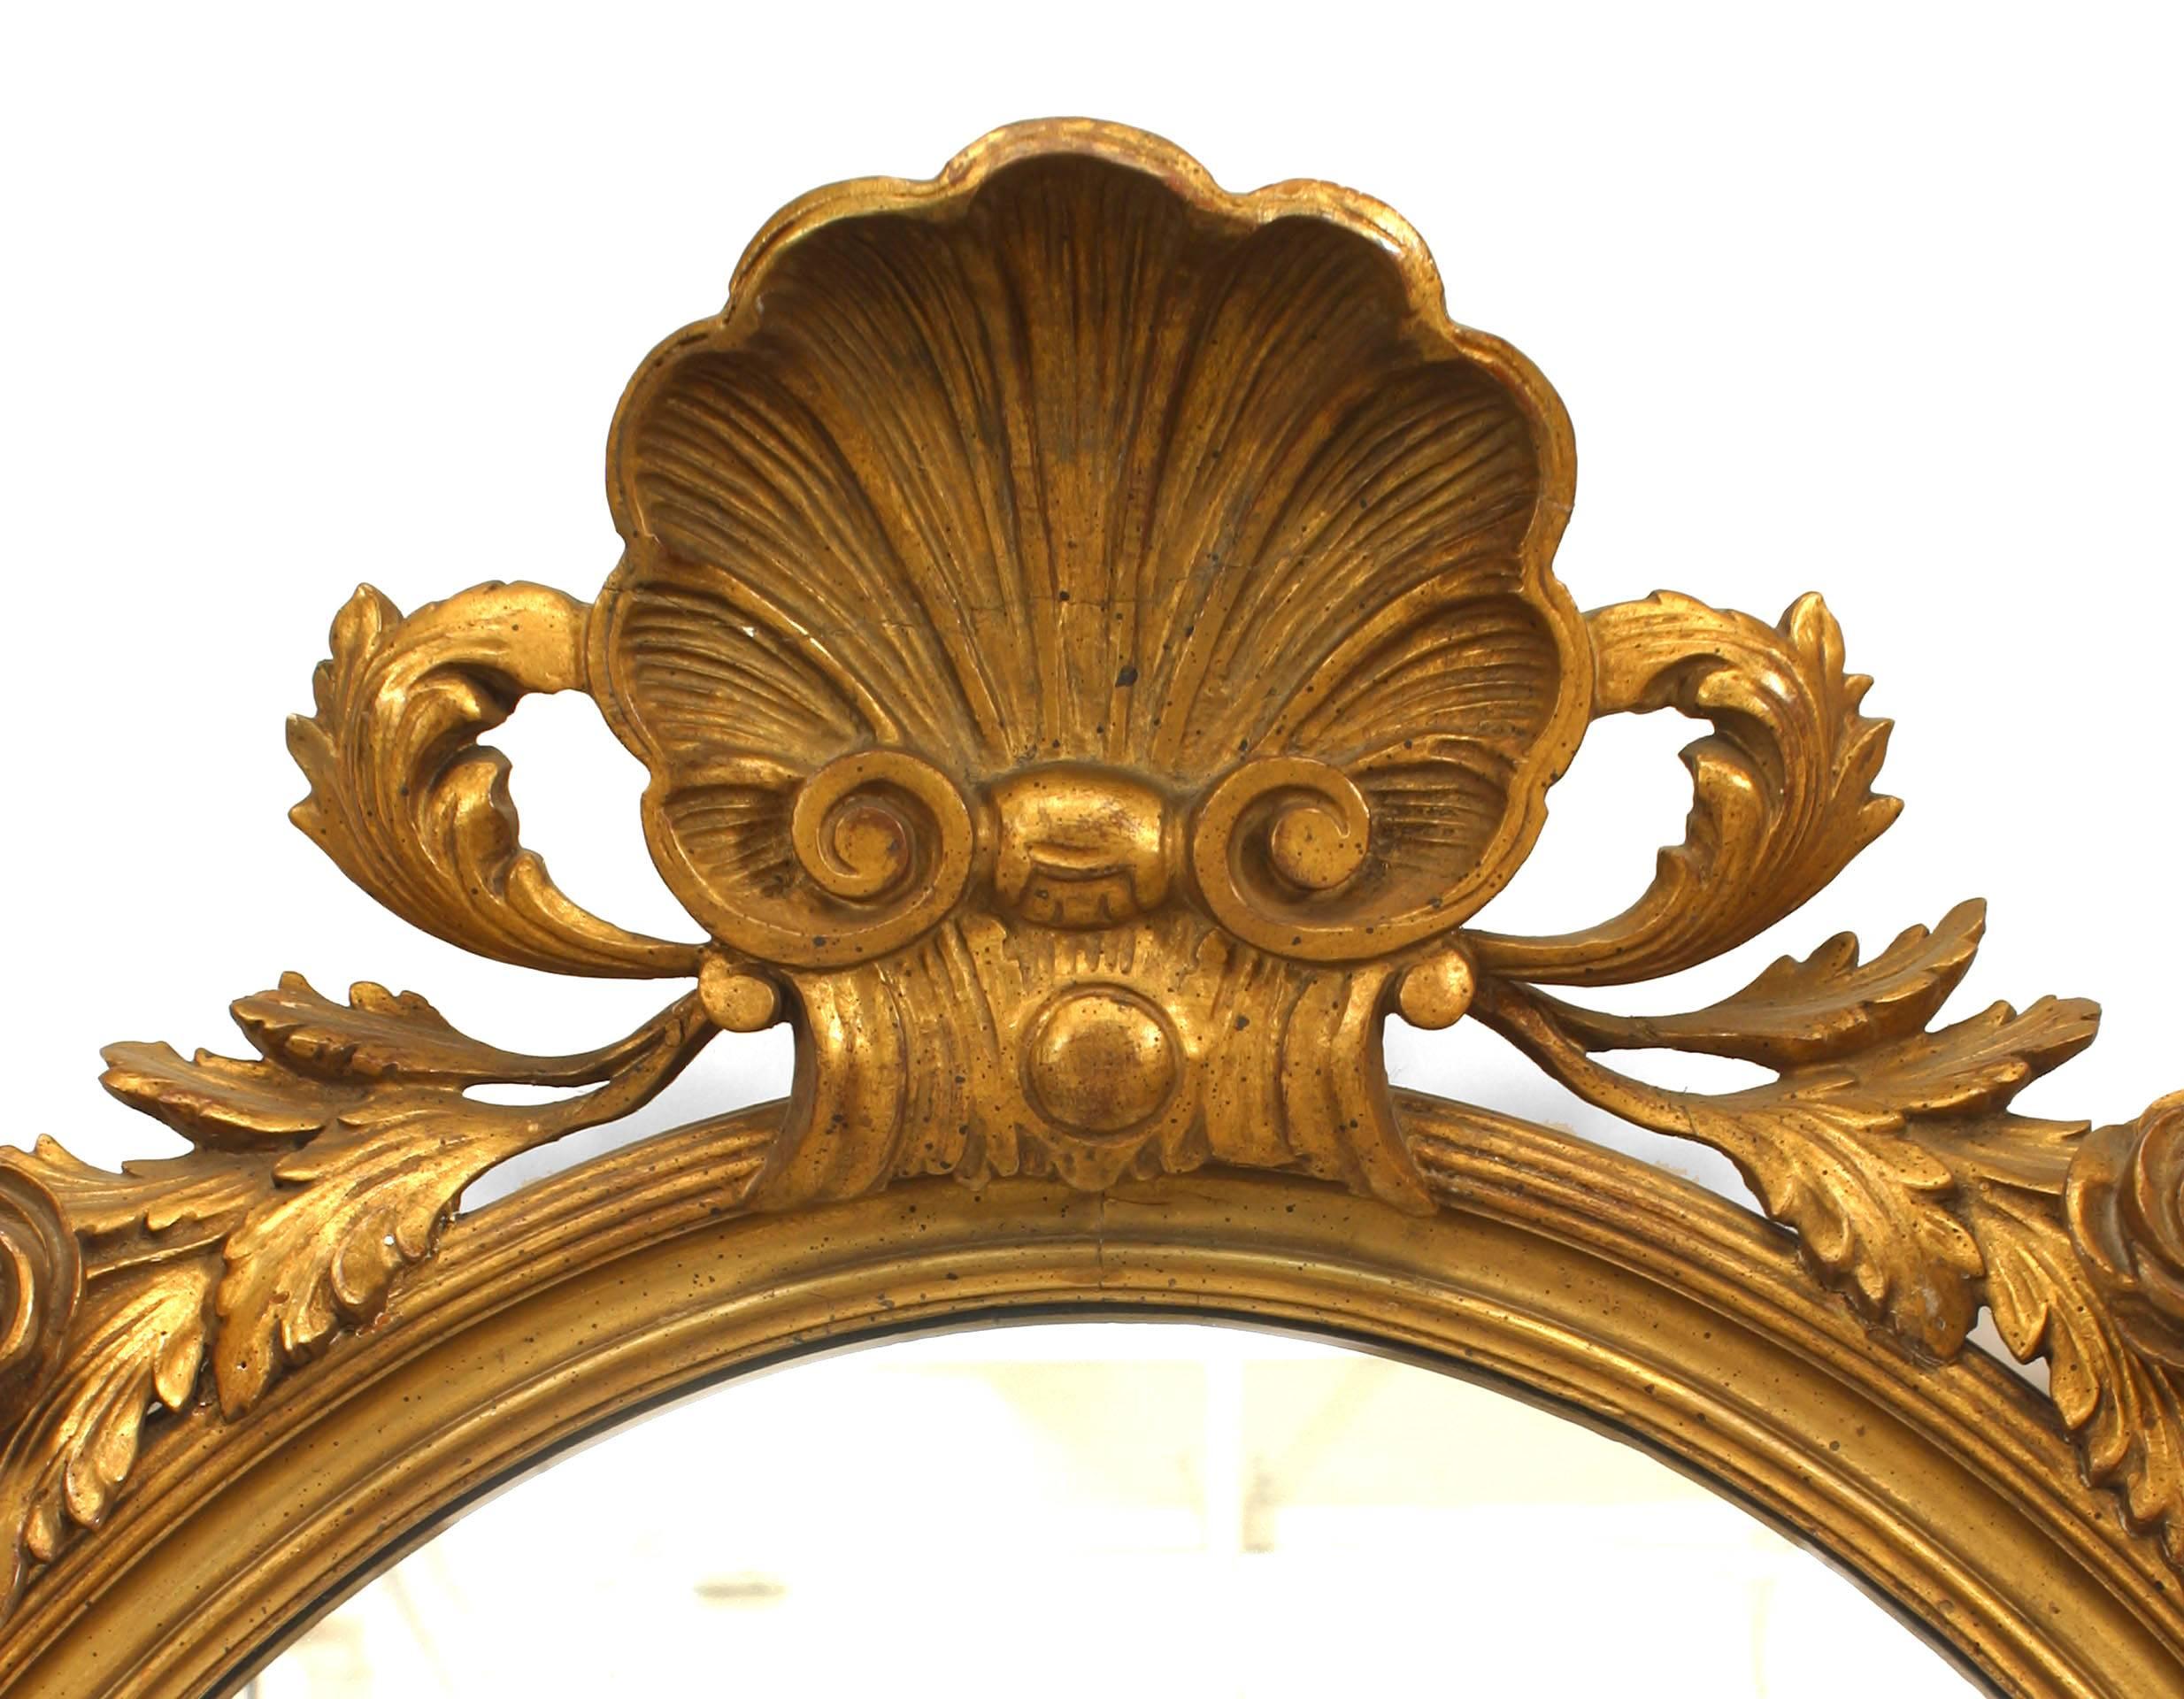 French Victorian oval giltwood wall mirror with a carved shell pediment surrounded by carved floral trim.
